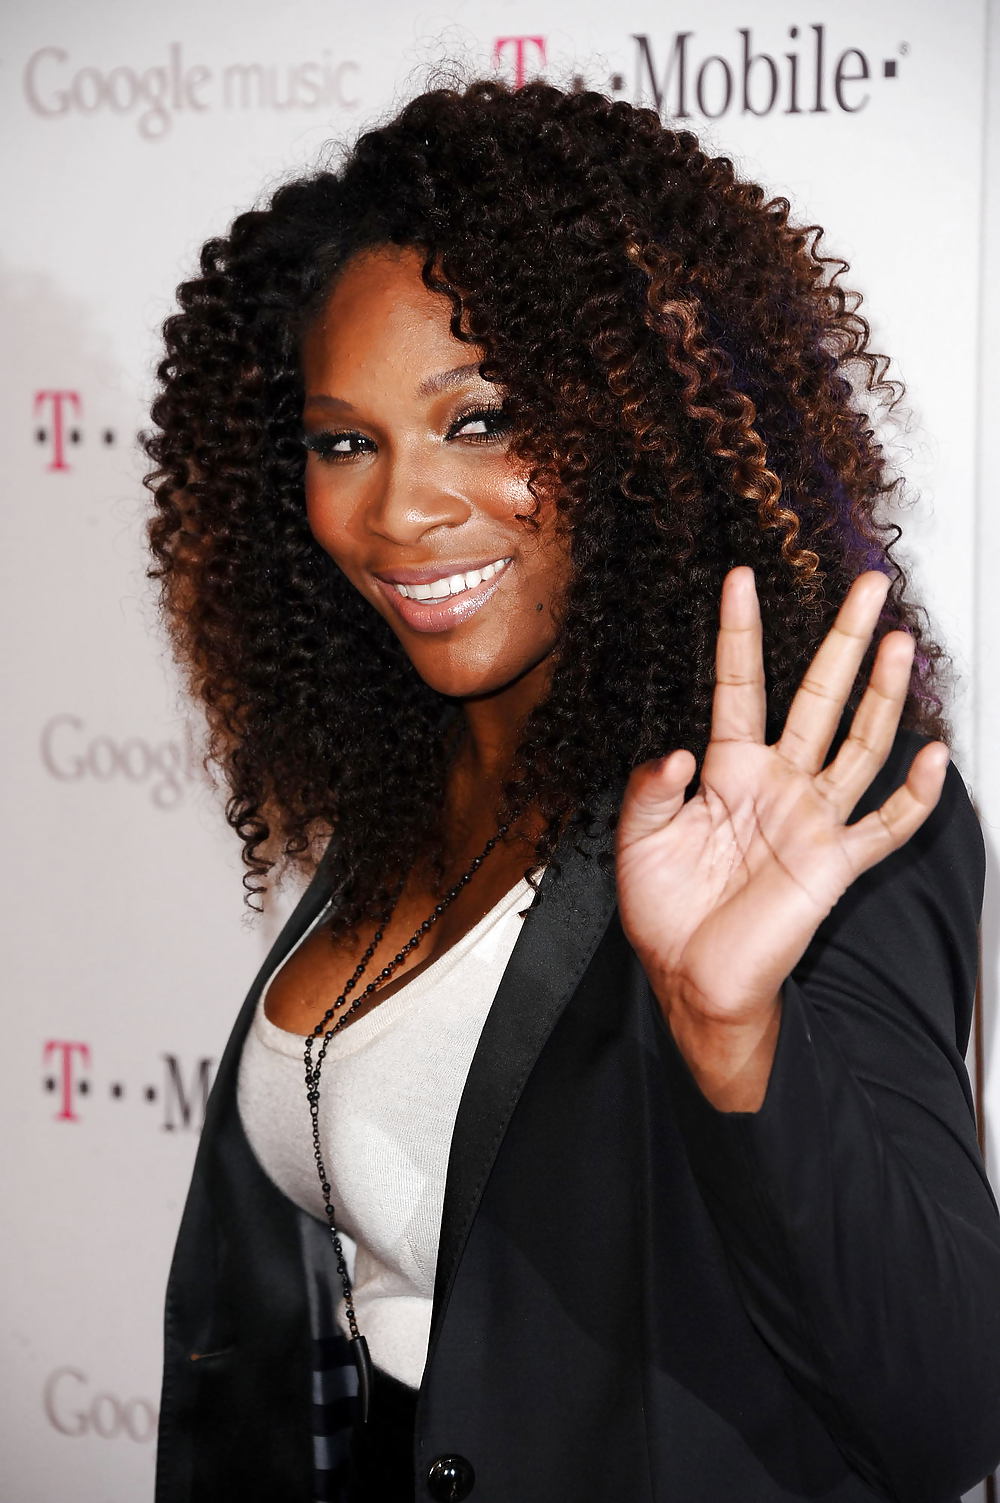 Serena Williams LEGGY at the Google Music launch party in LA #7112391